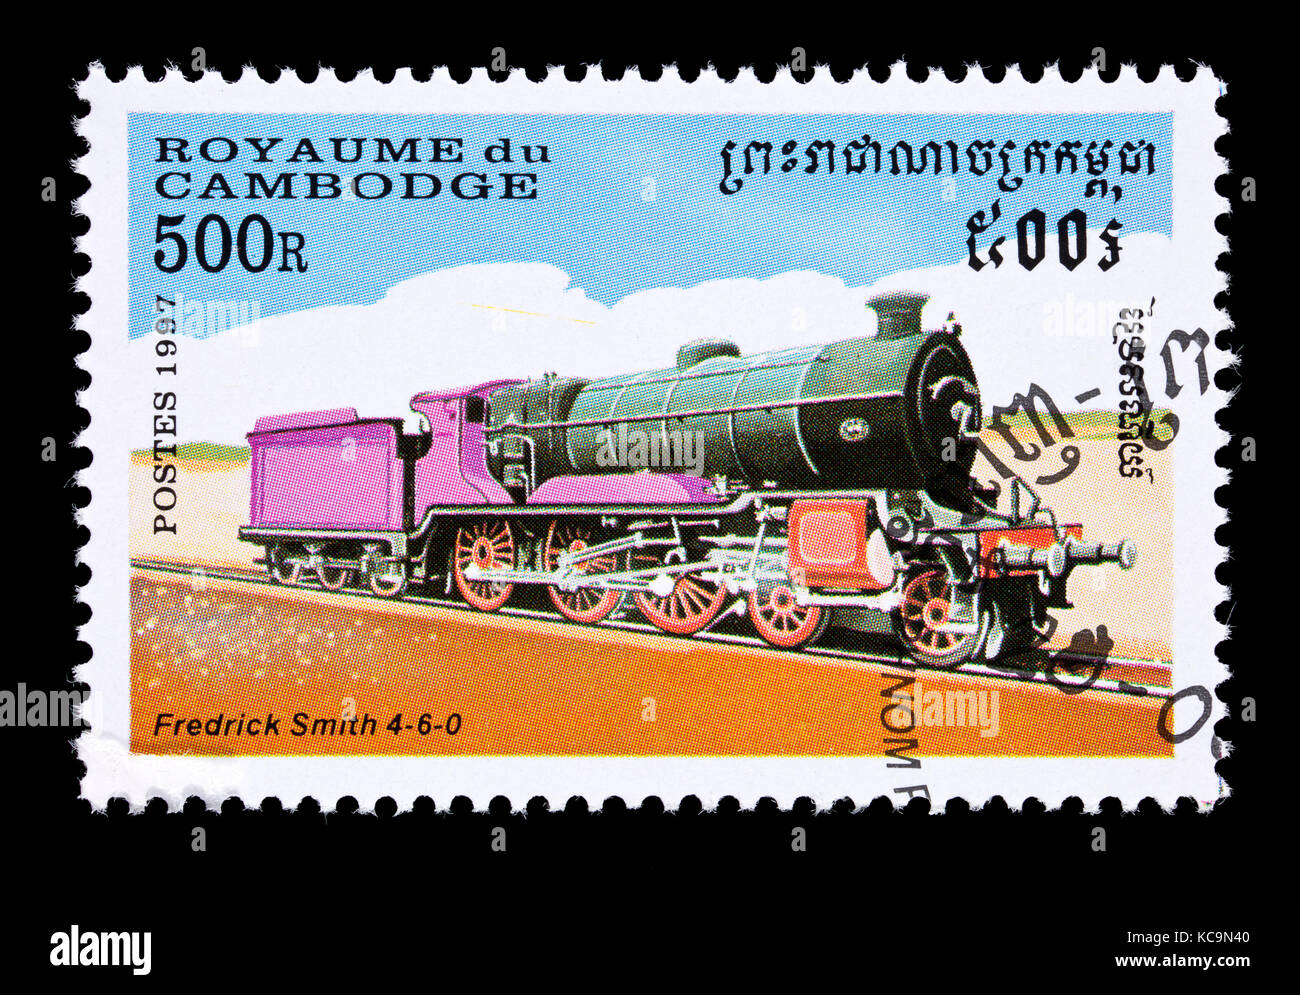 Postage stamp from Cambodia depicting a Frederick Smith 4-6-0 steam locomotive. Stock Photo